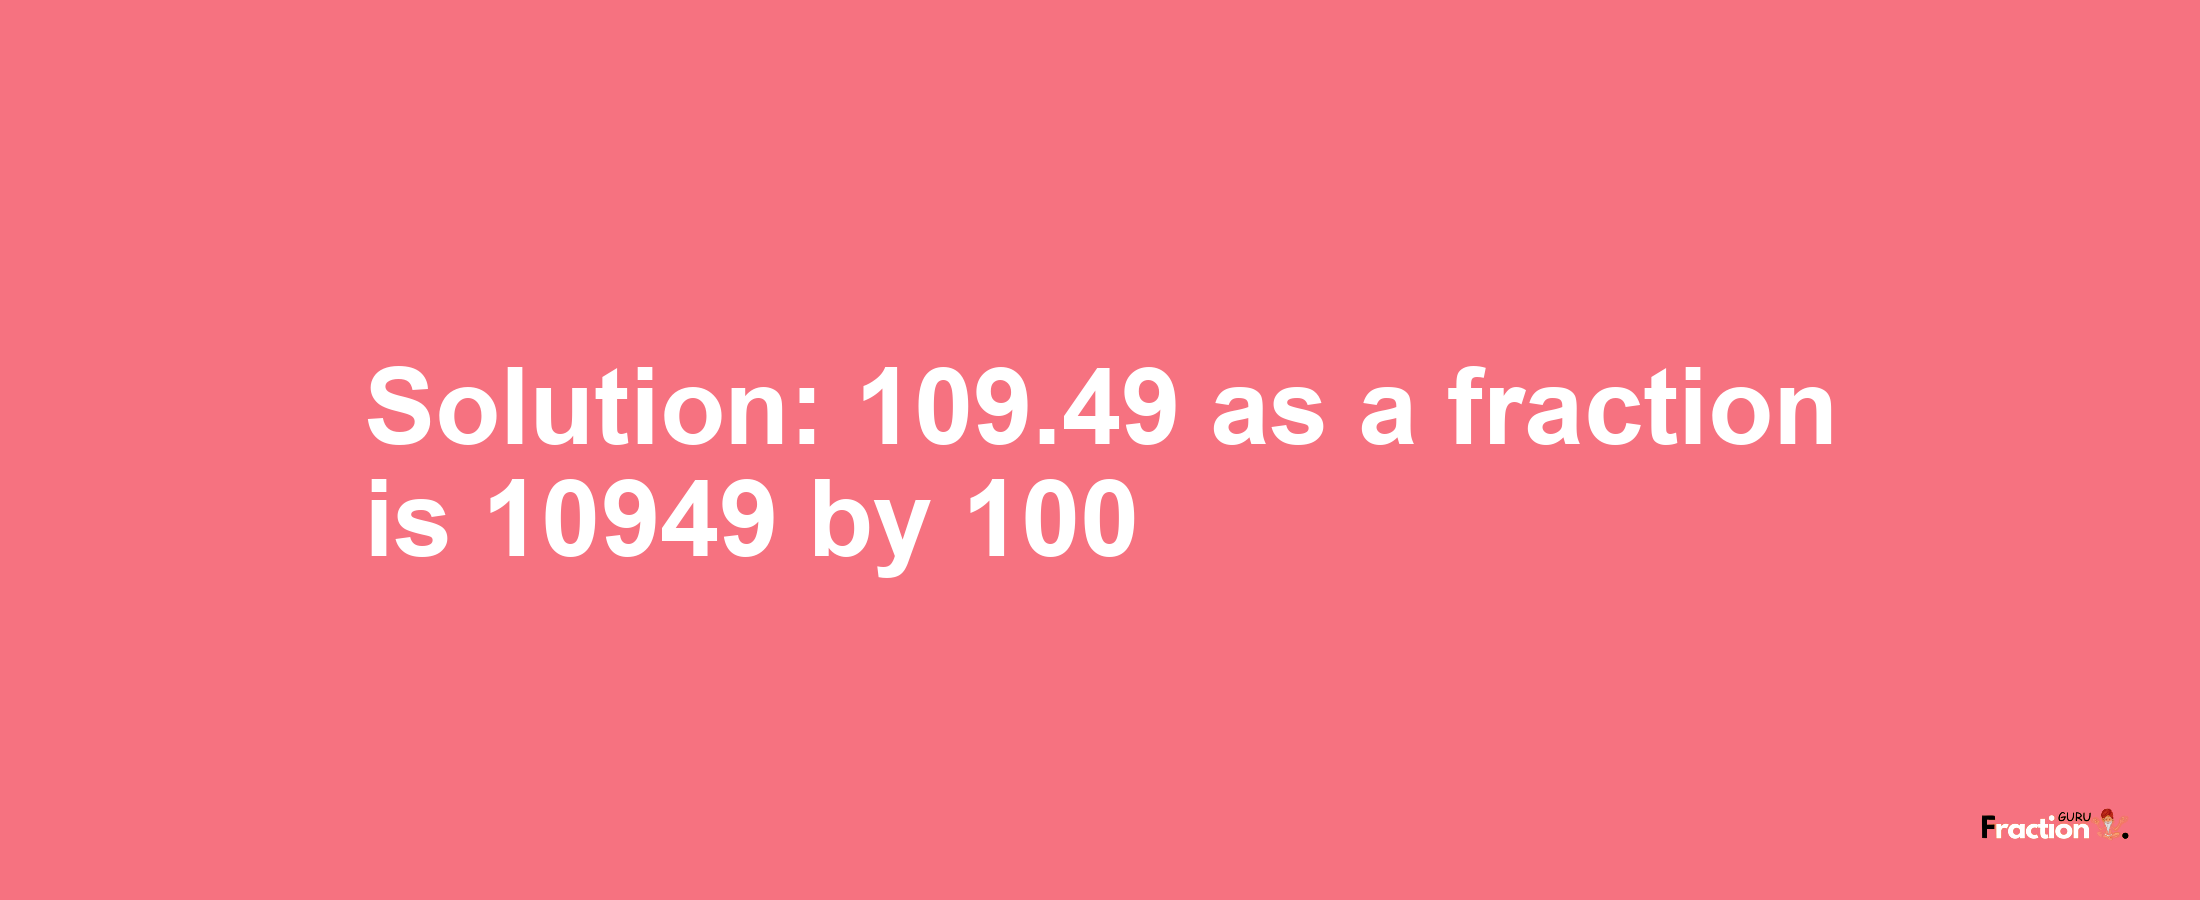 Solution:109.49 as a fraction is 10949/100